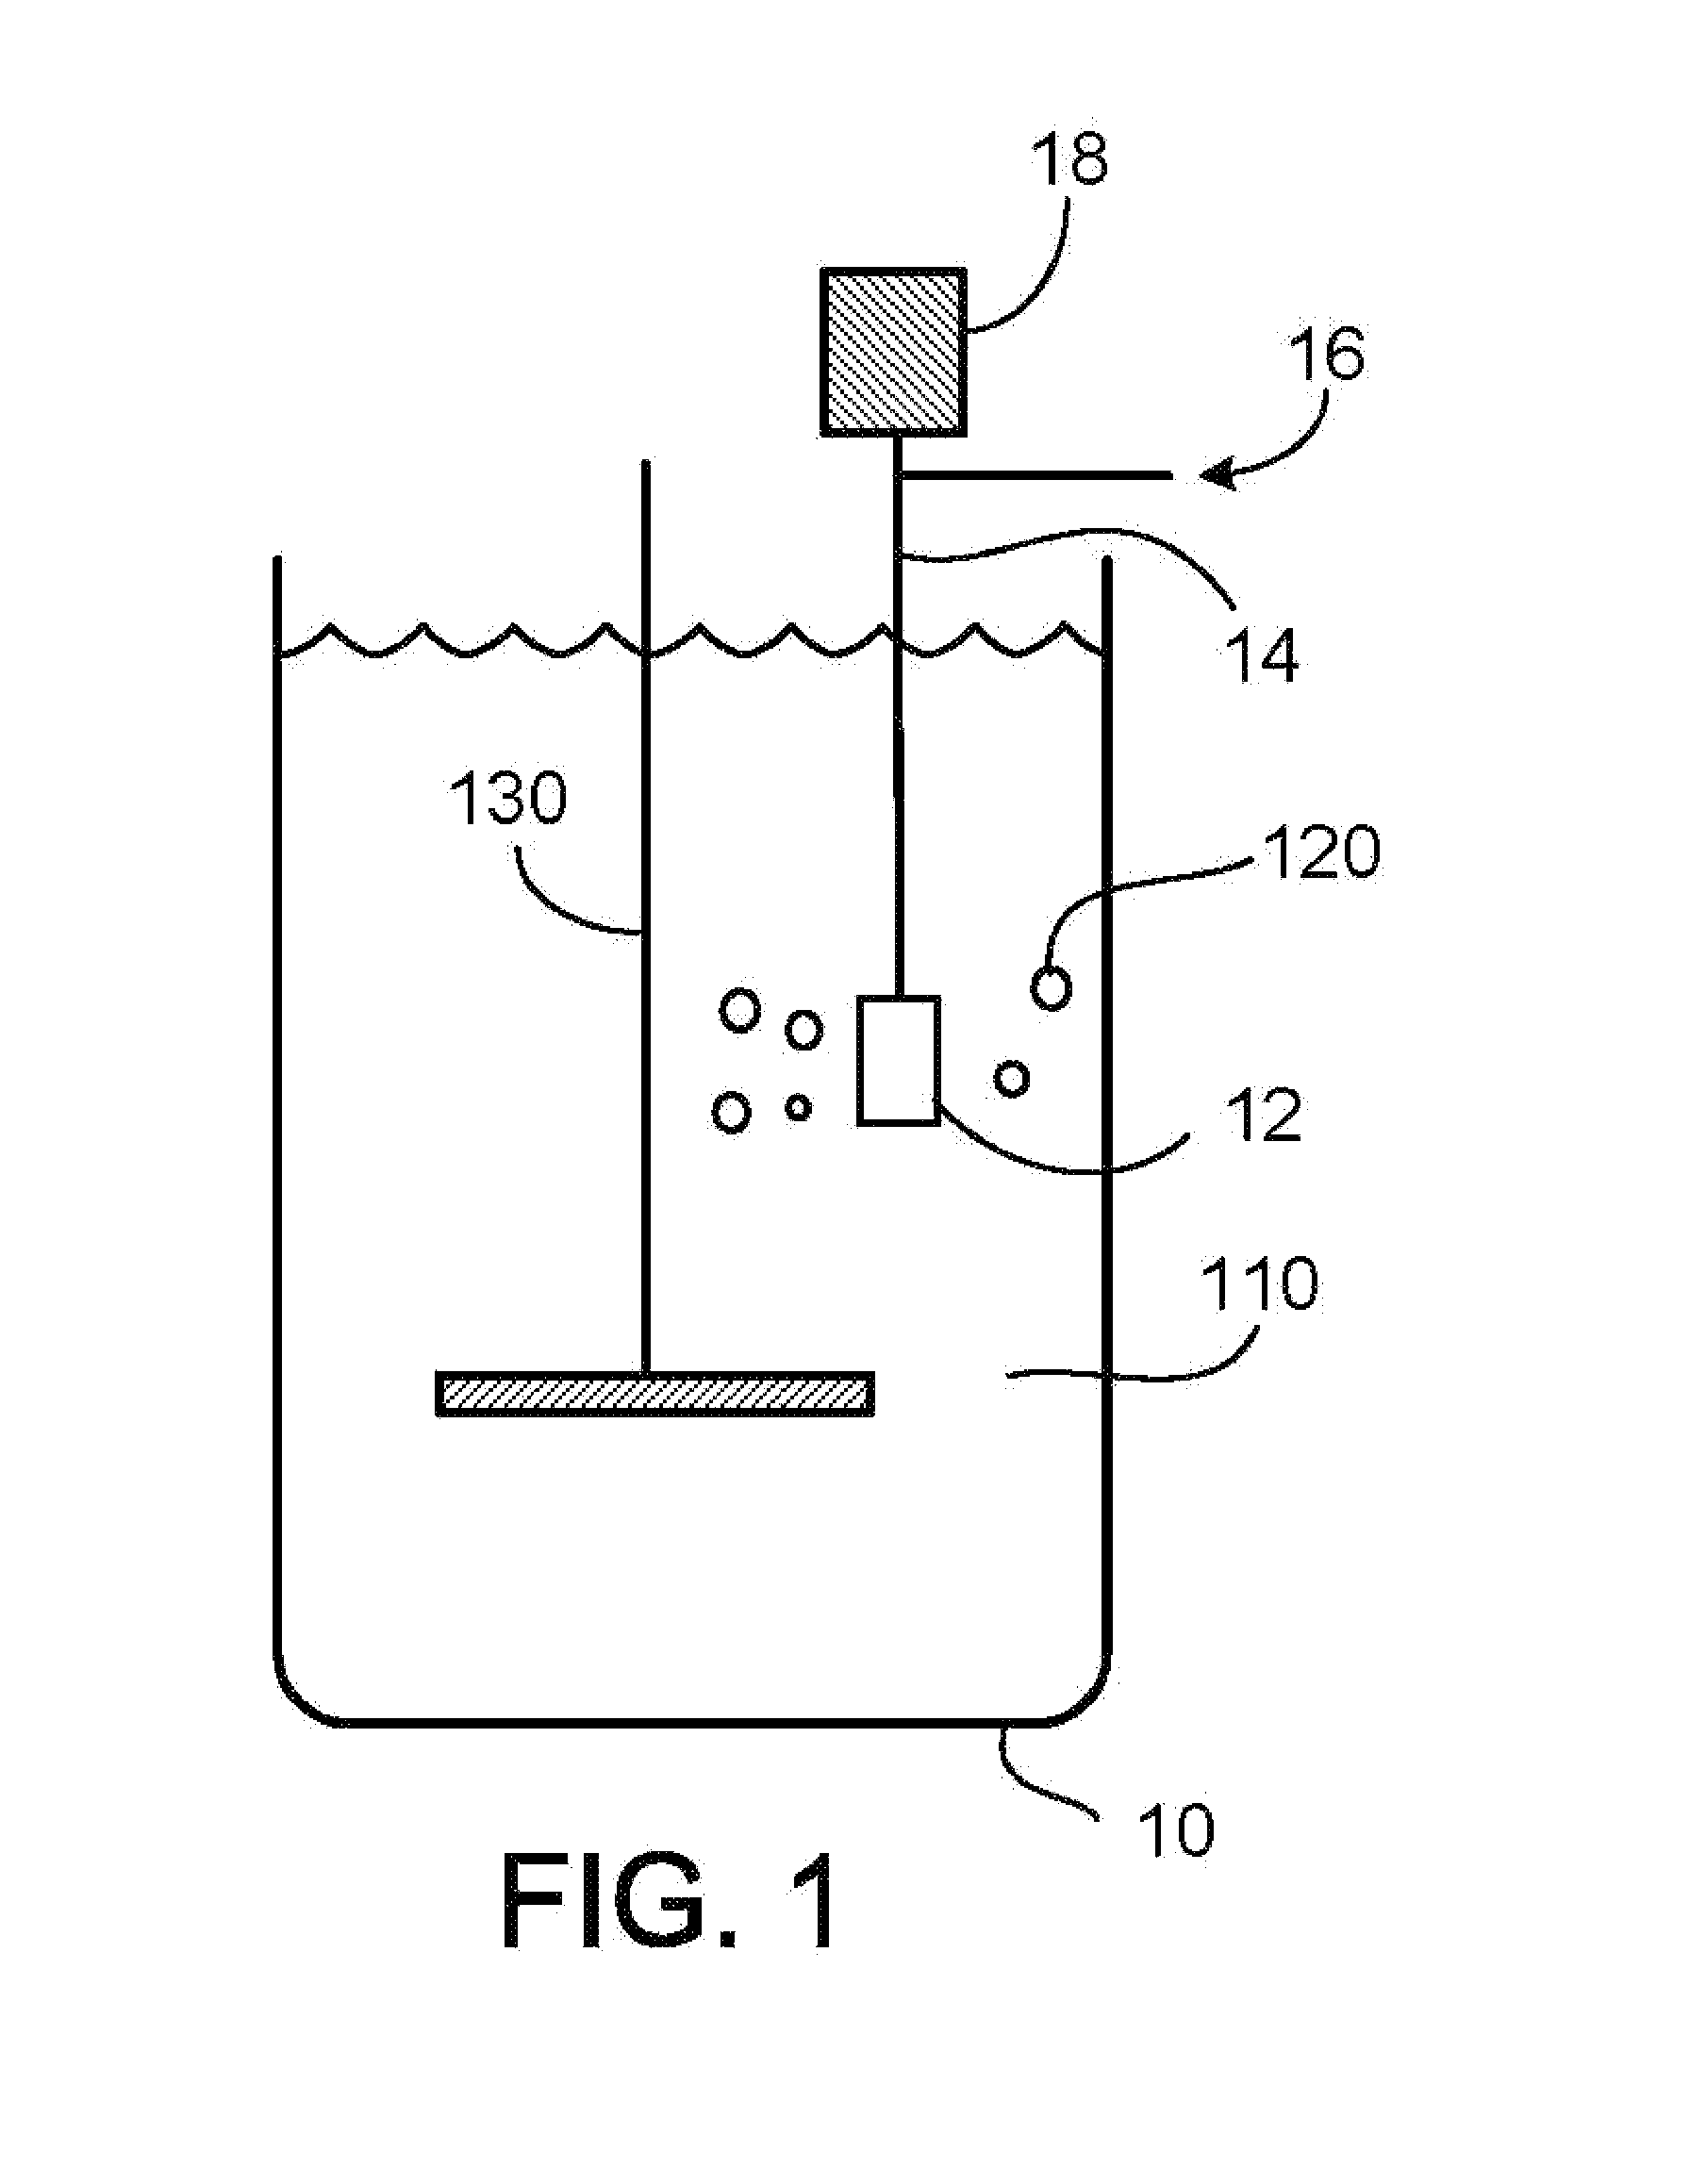 Method of Producing Uniform Polymer Beads of Various Sizes